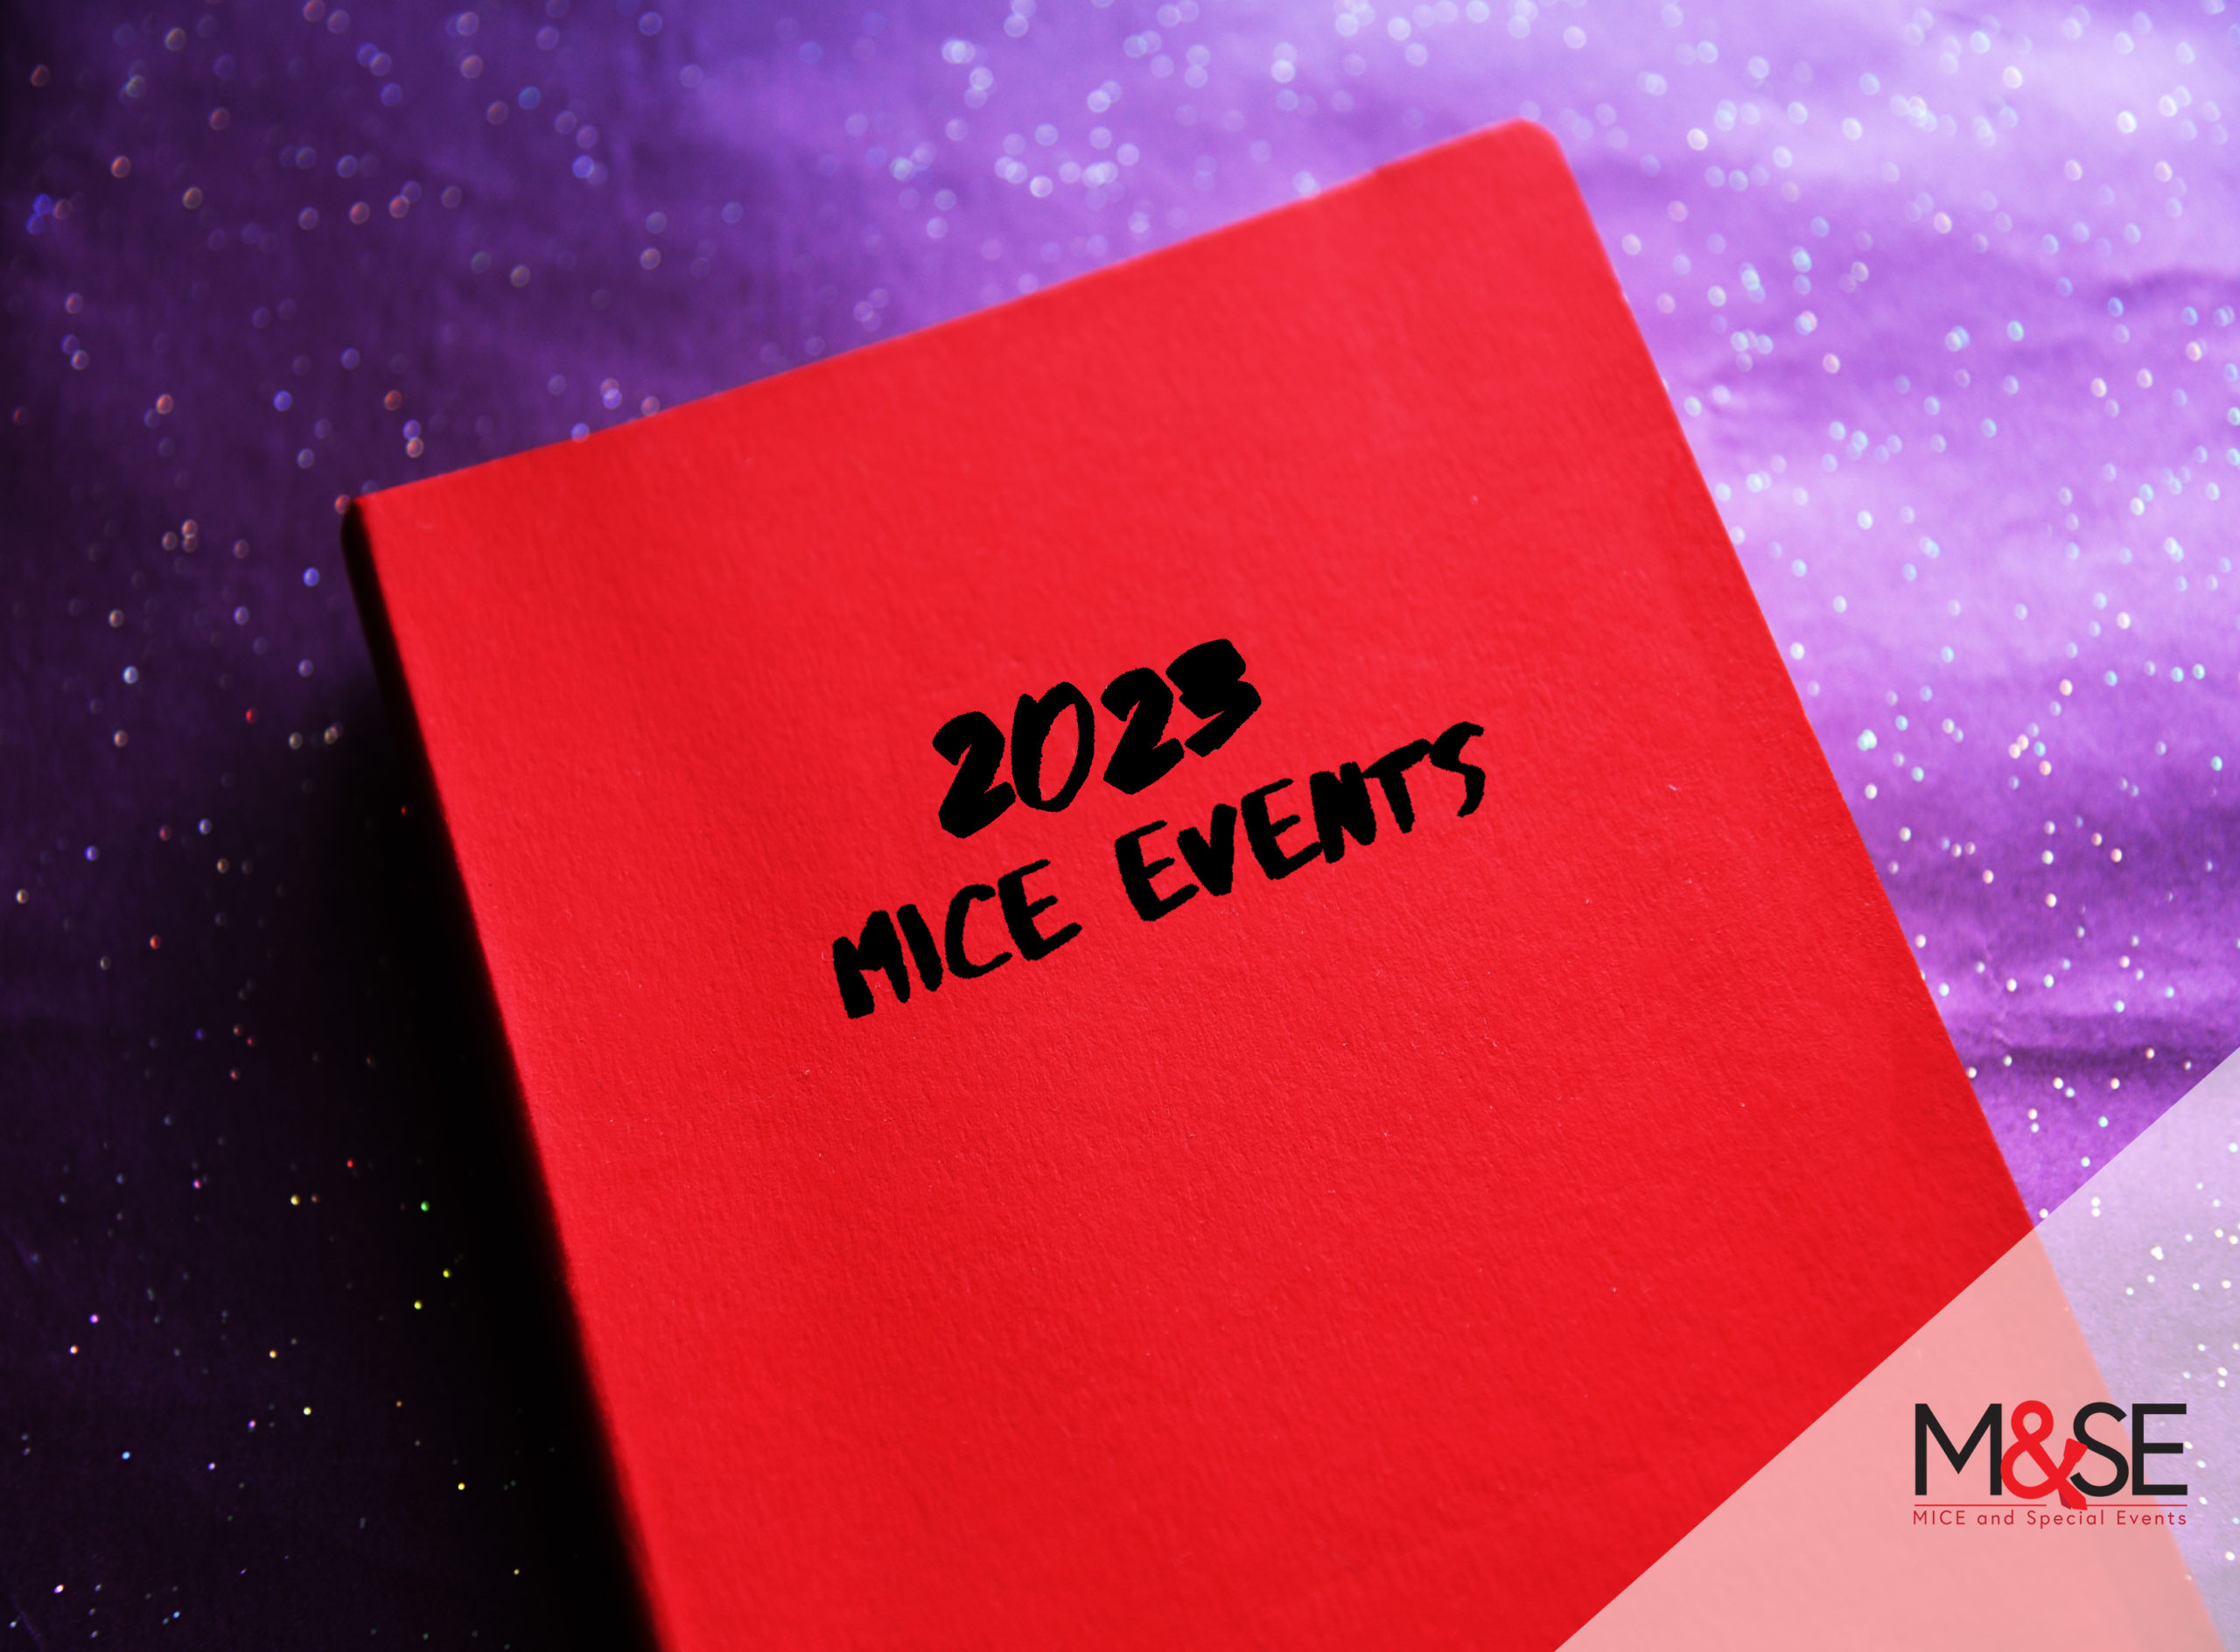 MICE Events 2023